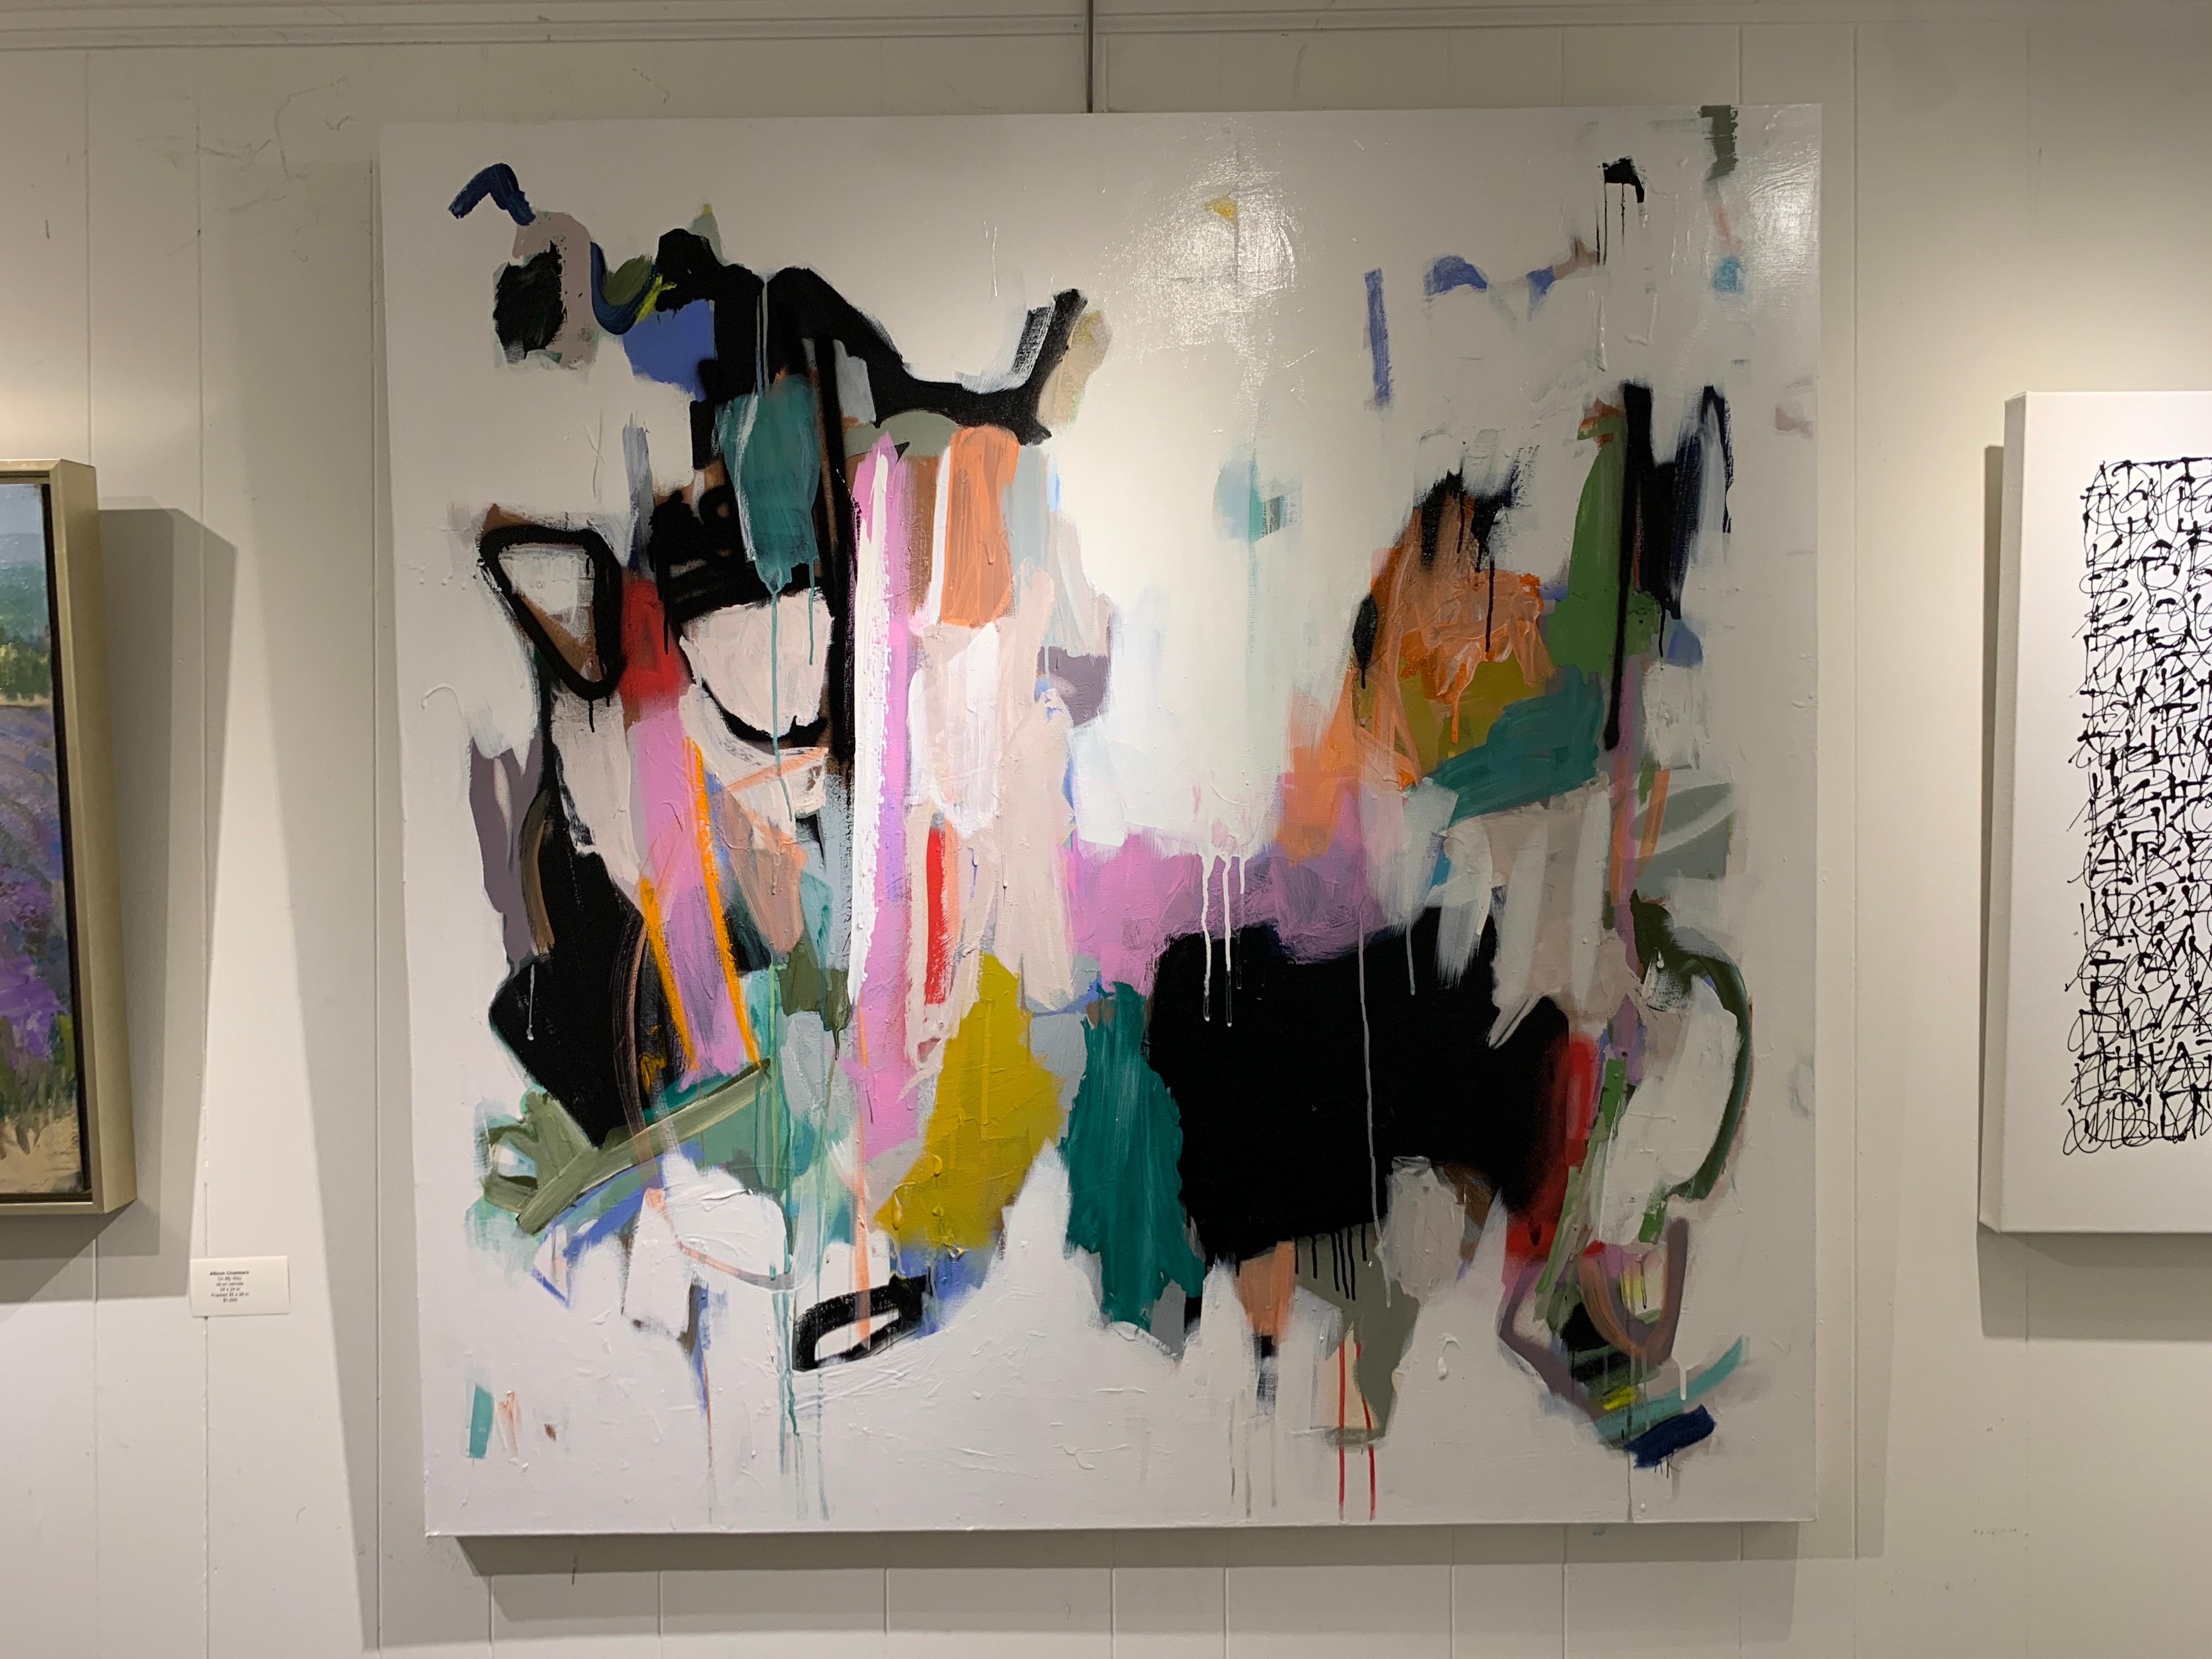 'Should I Ever Need Reminding' is a large mixed media on canvas abstract painting of square format created by American artist Annie King in 2021. Featuring a palette made of green, orange, grey, white and blue among other tones, this painting